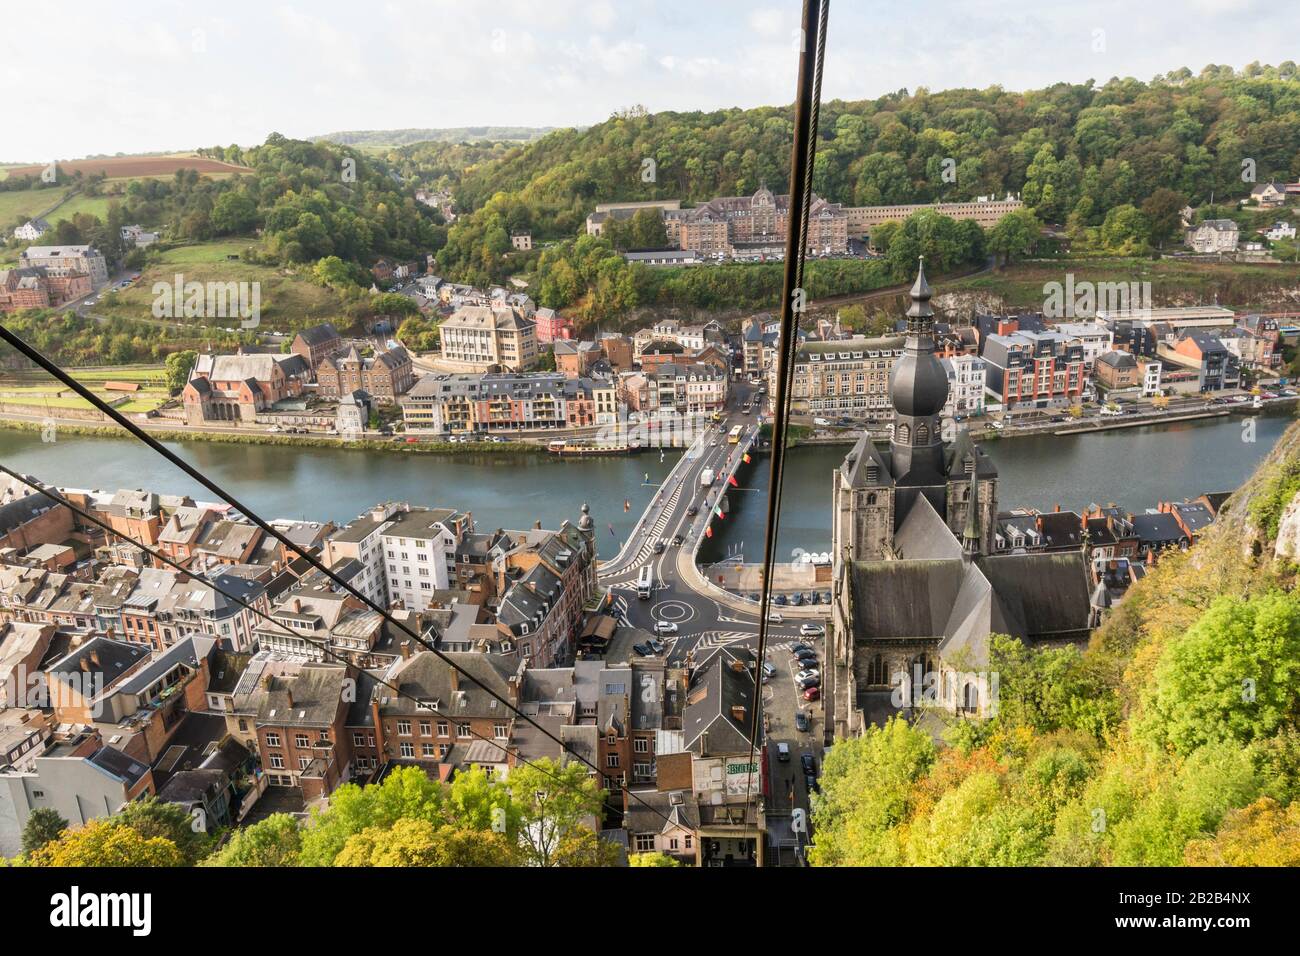 Charles de Gaulle bridge crossing the river Meuse in the picturesque town of Dinant Belguim. October 2019. Stock Photo